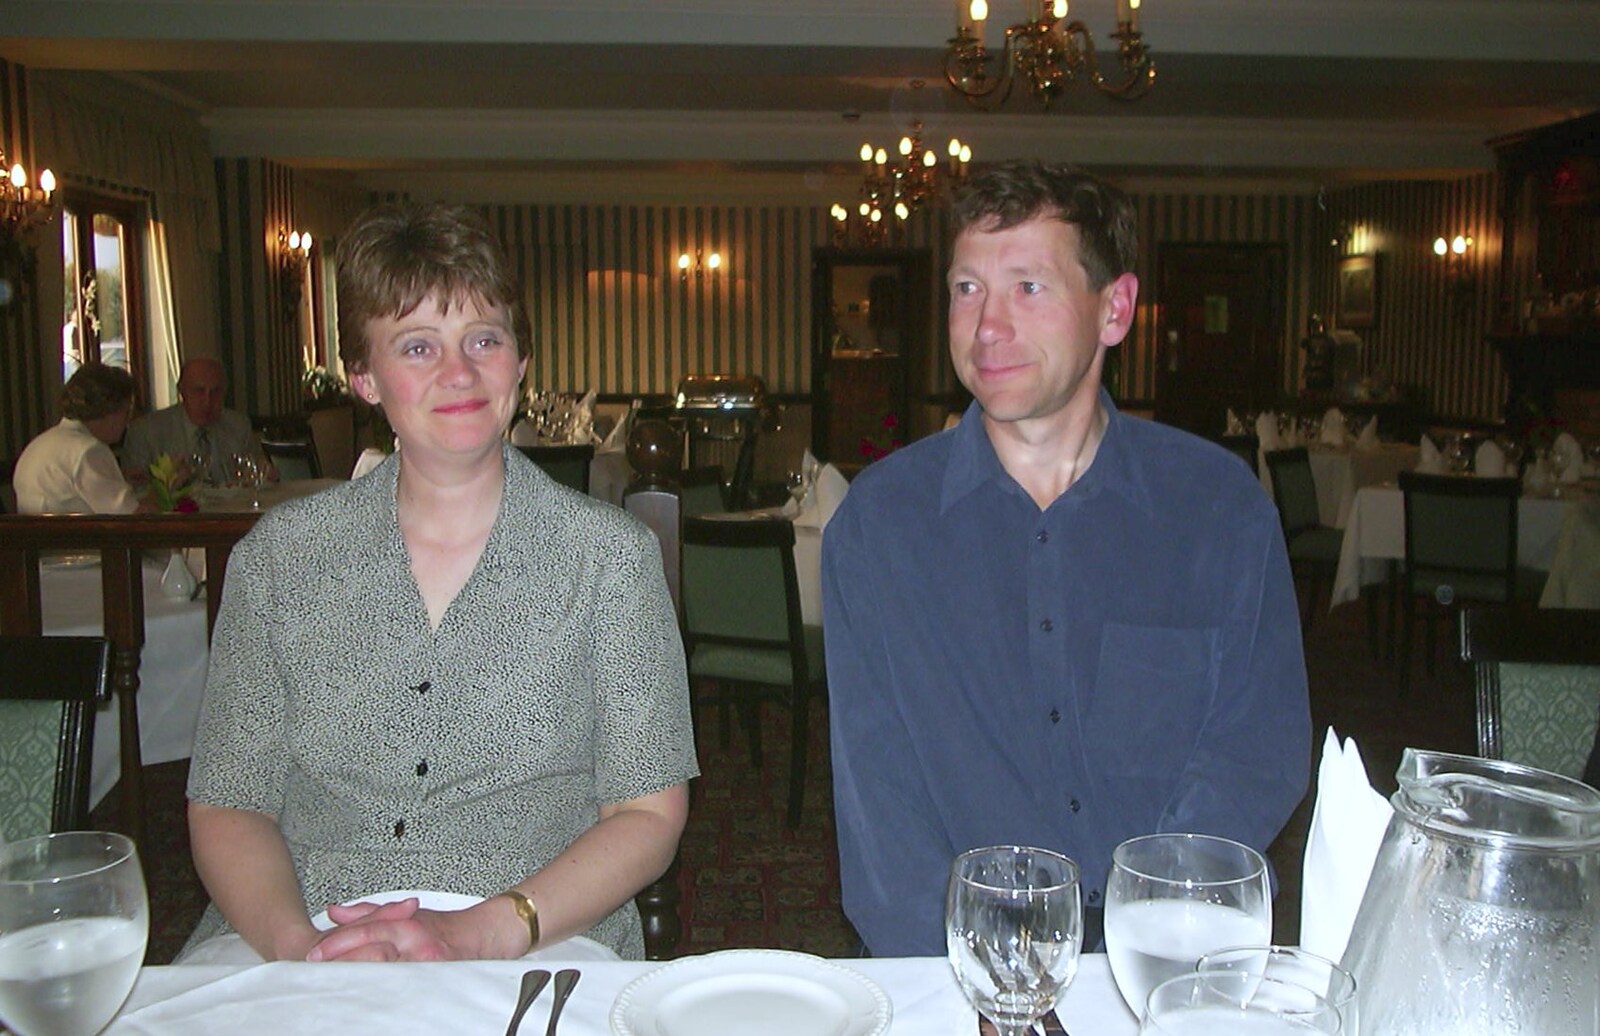 The BSCC Bike Ride, Shefford, Bedford - 11th May 2002: Pip and Apple, all frocked-up